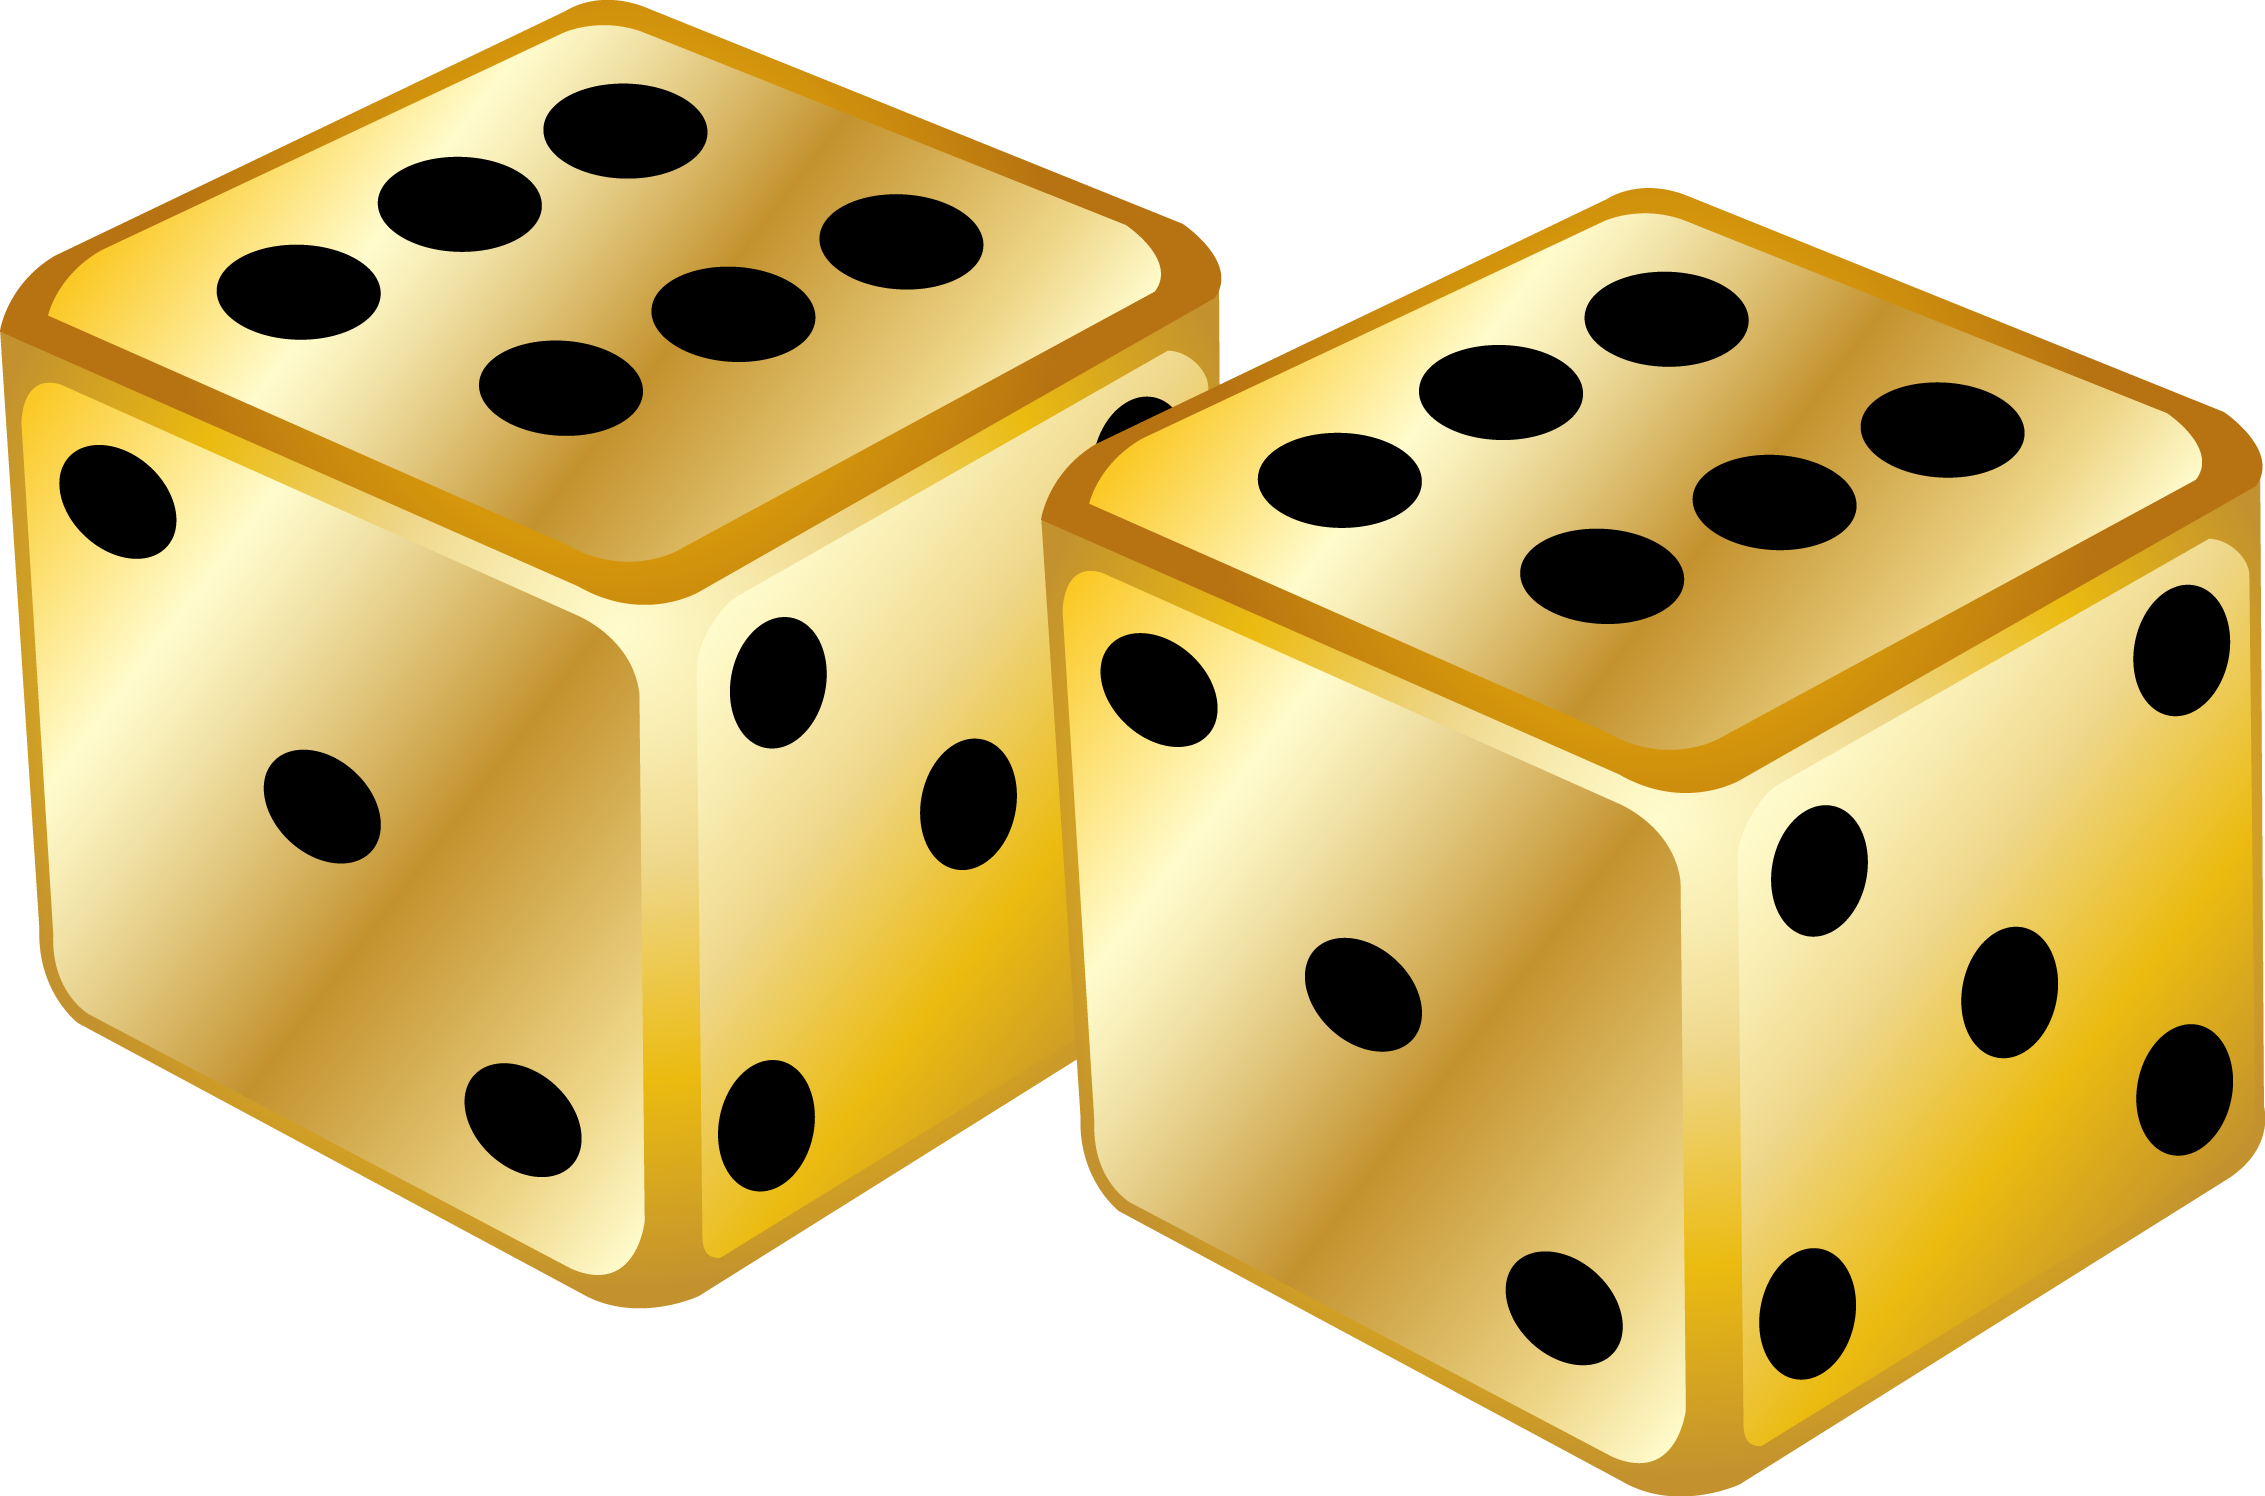 Dice PNG images free download